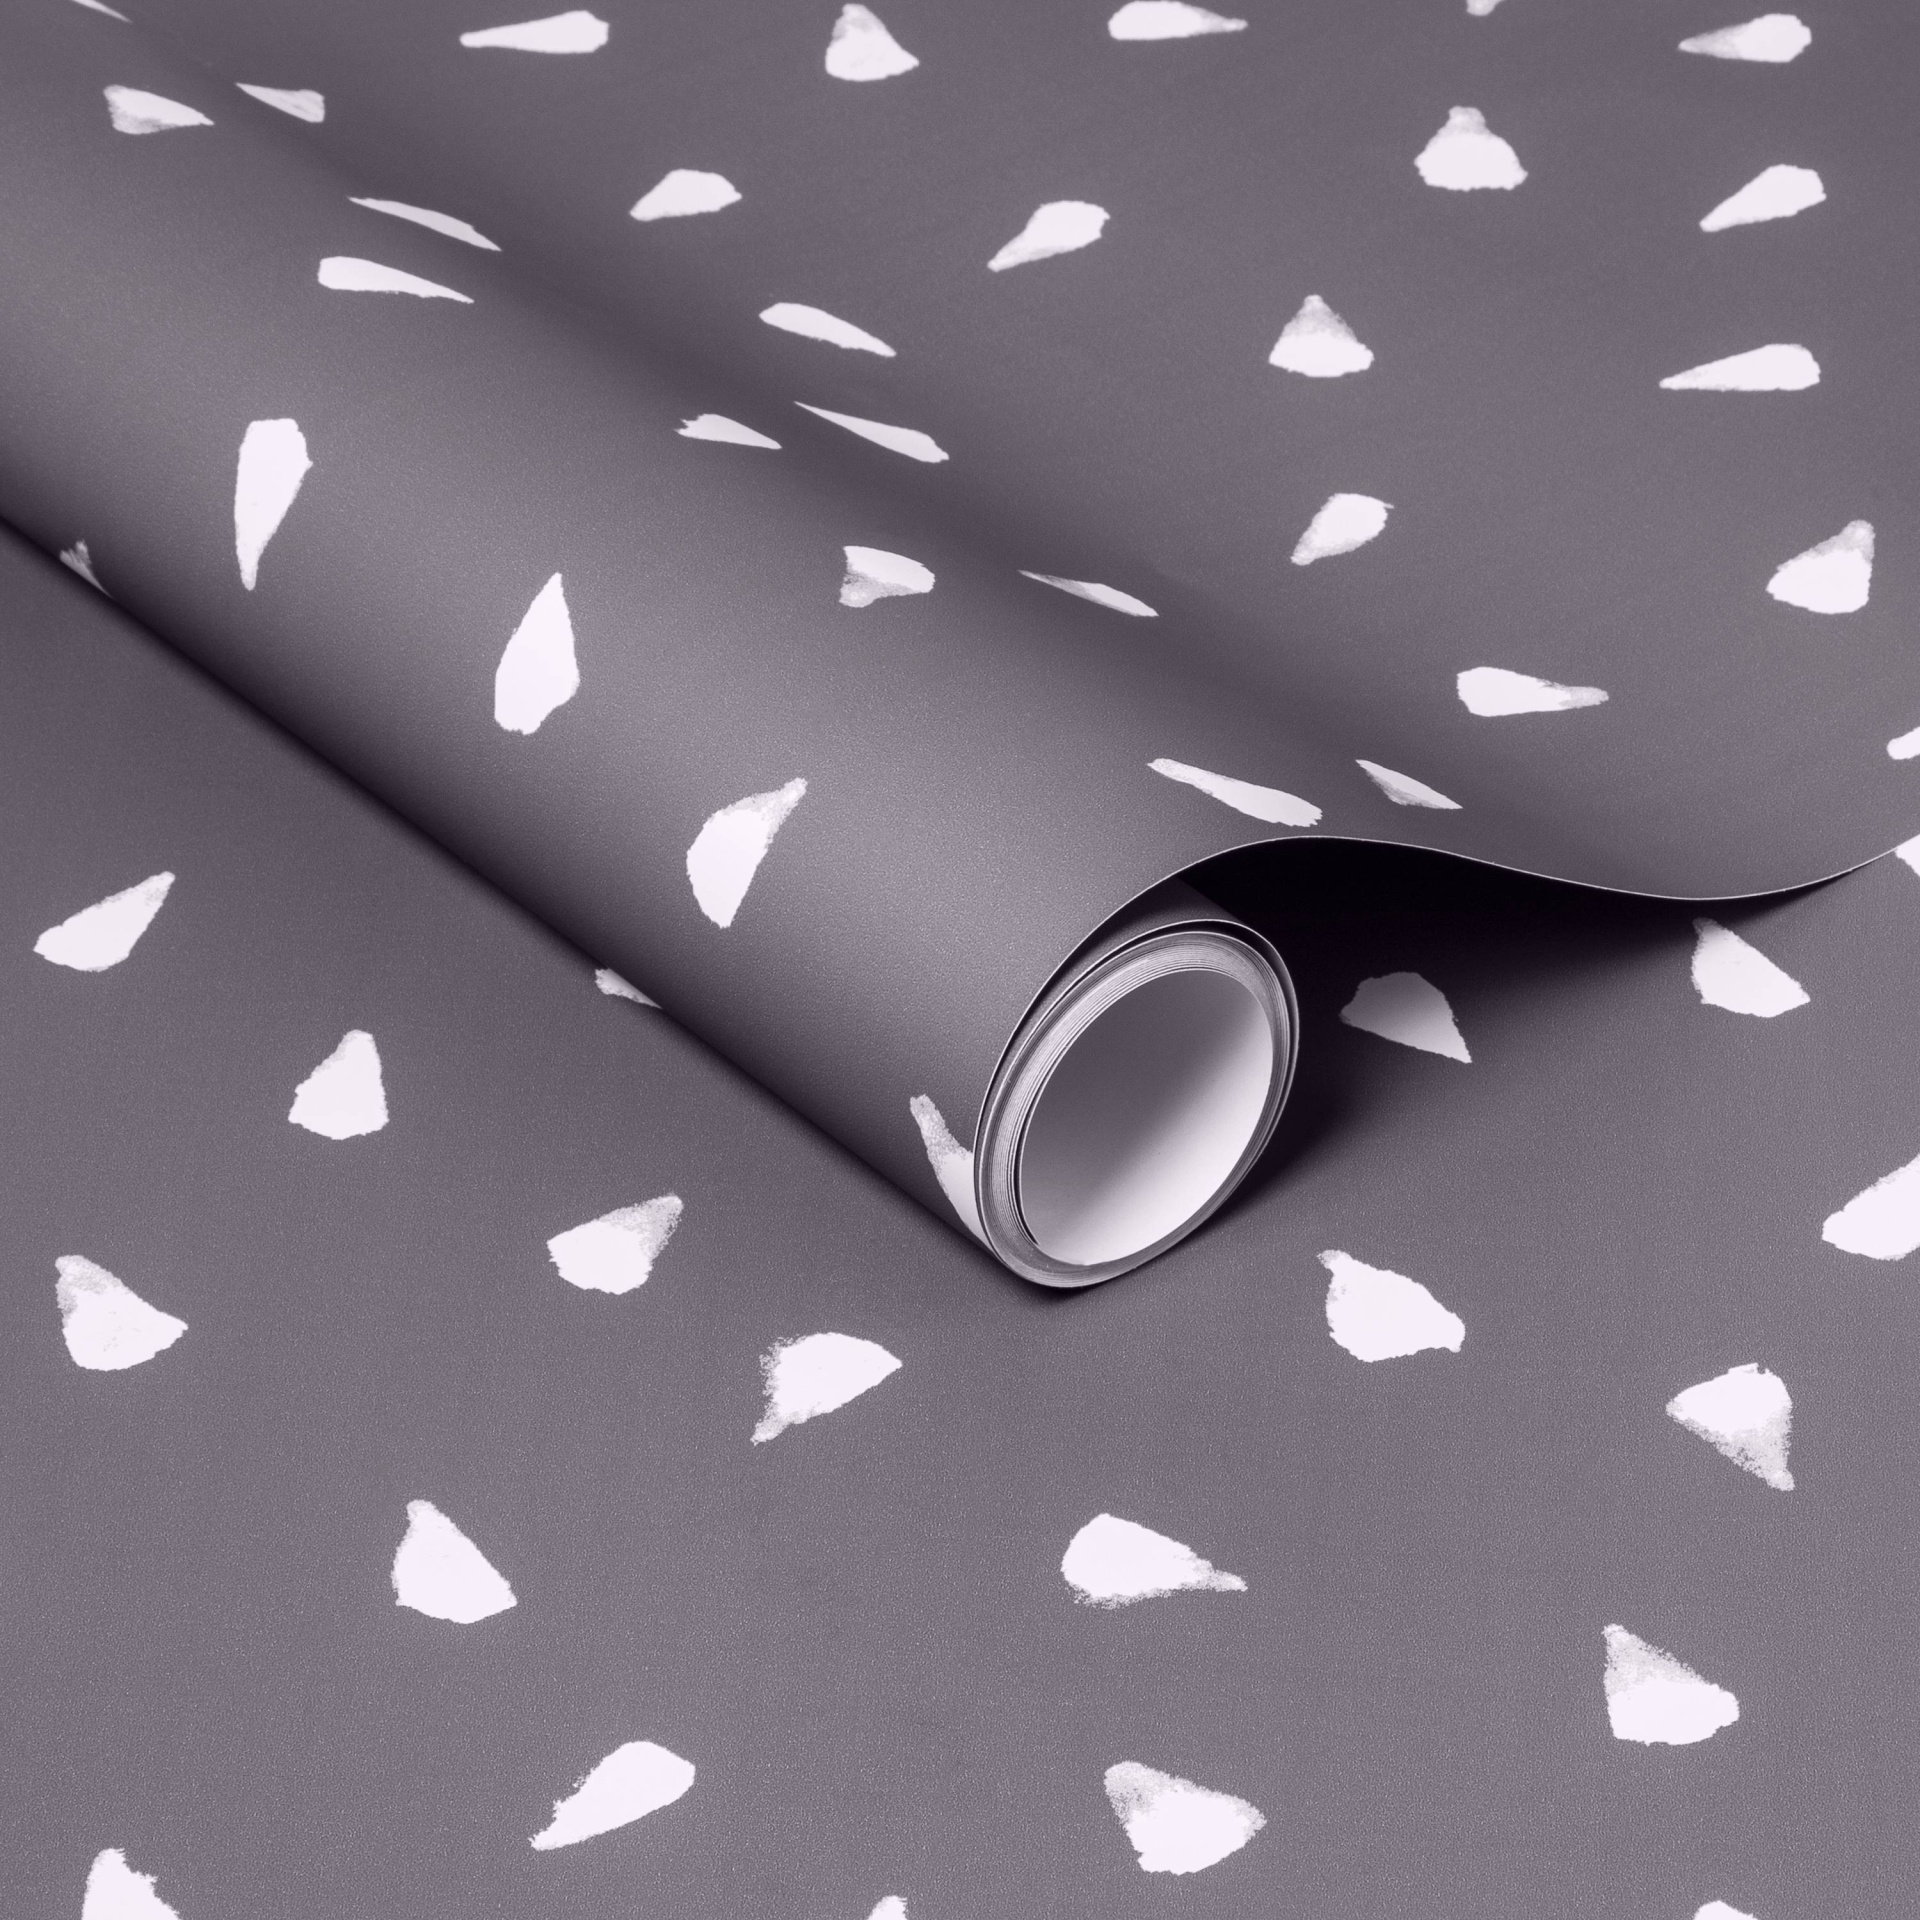 What You Need To Know About Peel And Stick Wallpaper  Hello home girl